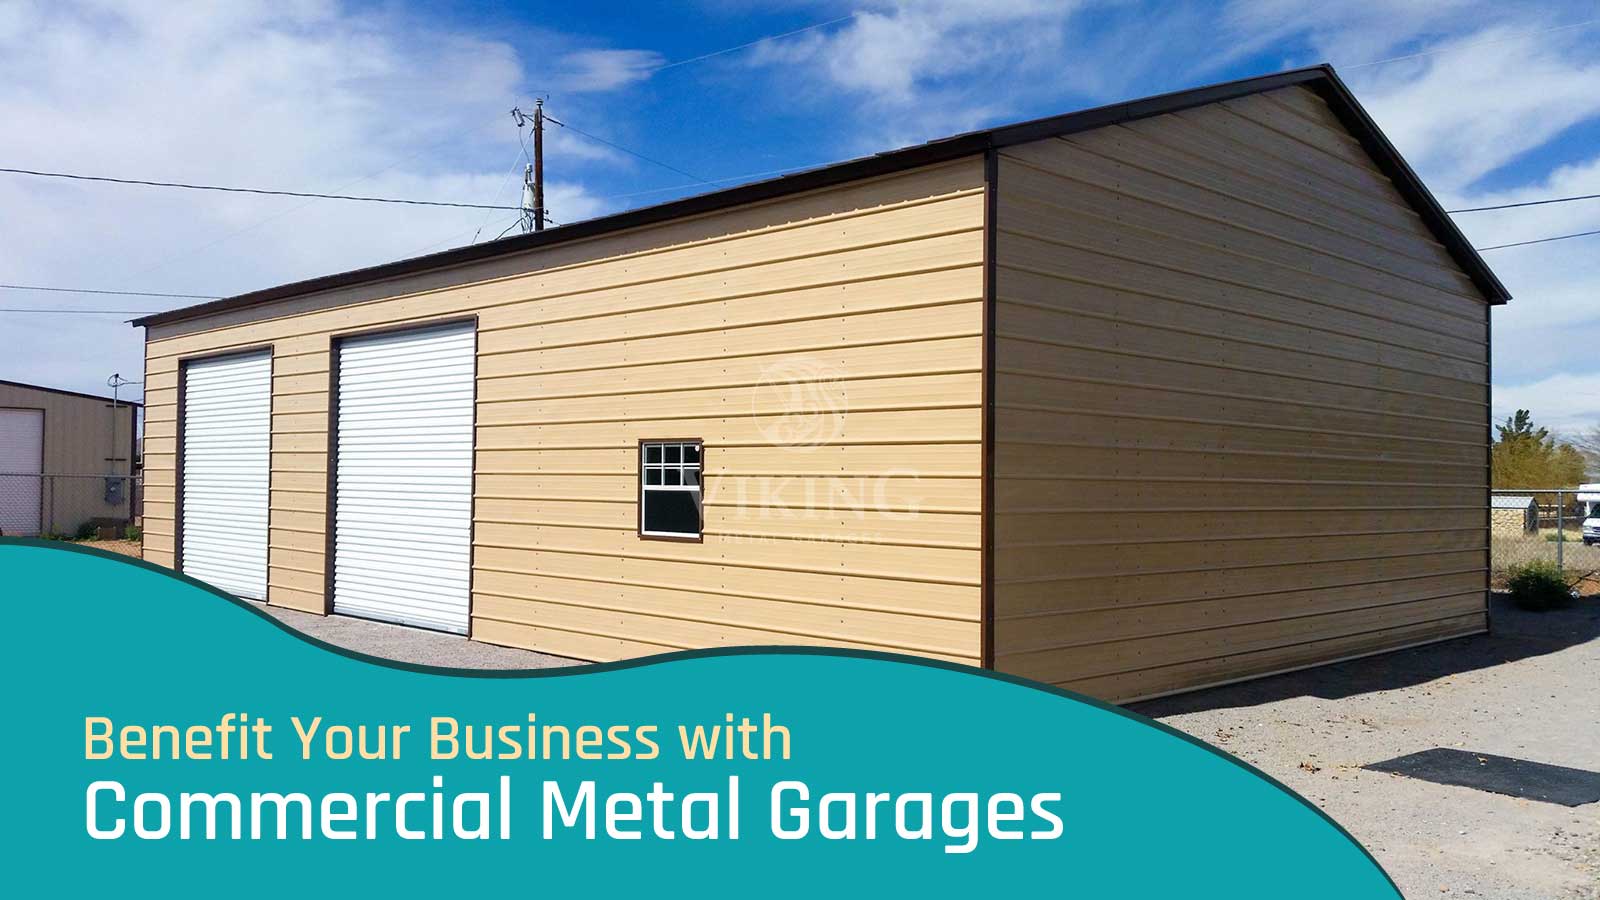 Benefit Your Business with Commercial Metal Garages